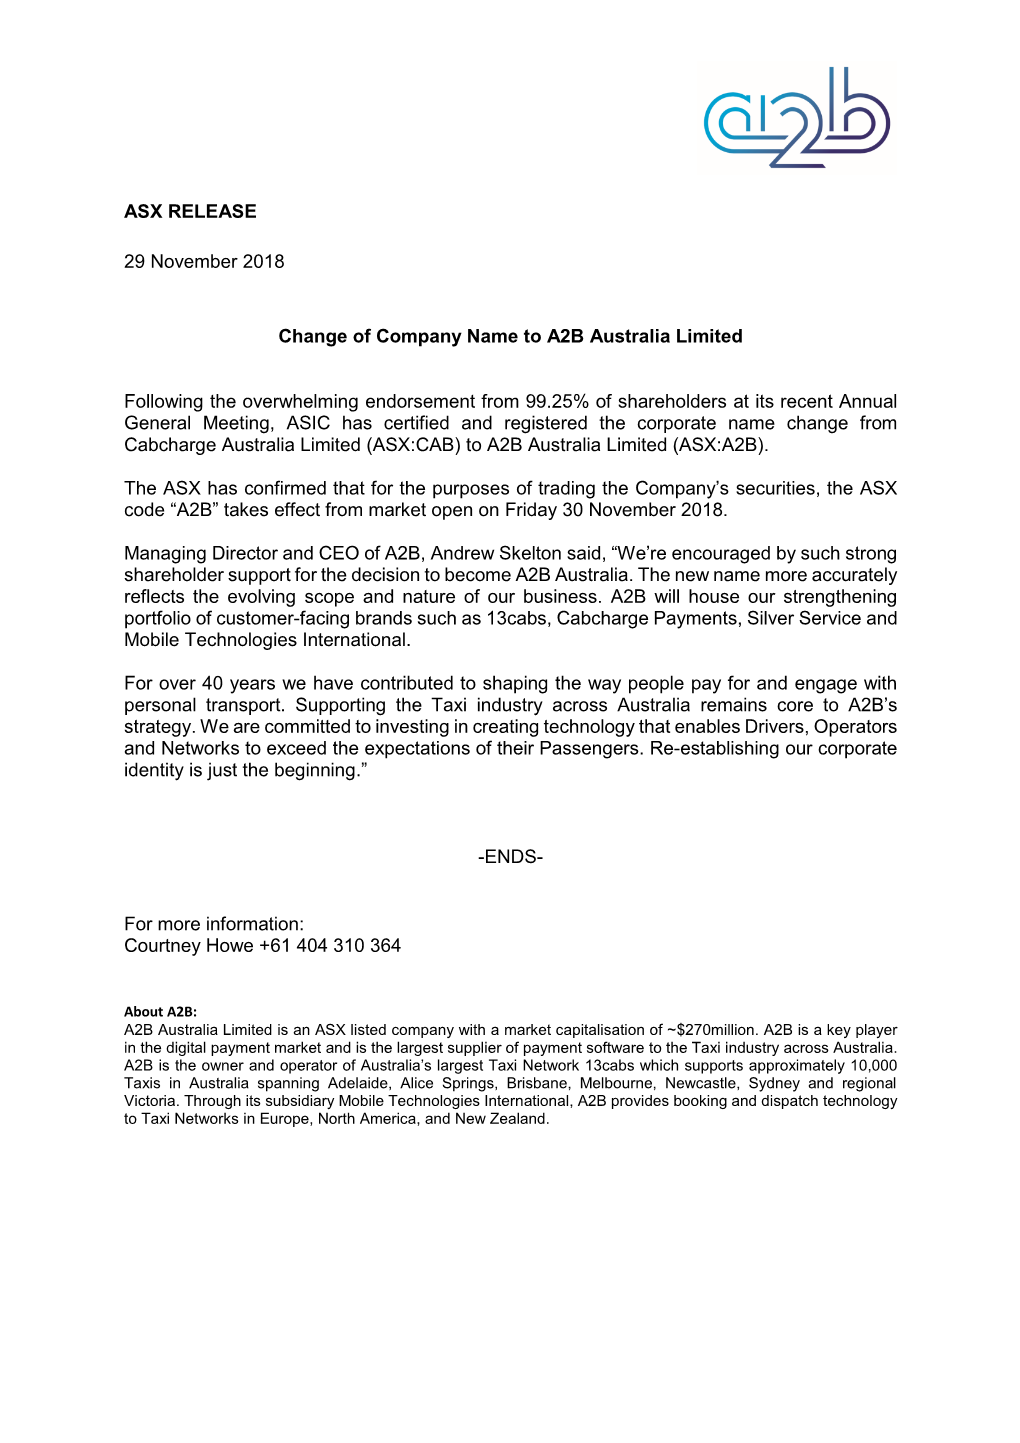 ASX RELEASE 29 November 2018 Change of Company Name to A2B Australia Limited Following the Overwhelming Endorsement from 99.25%